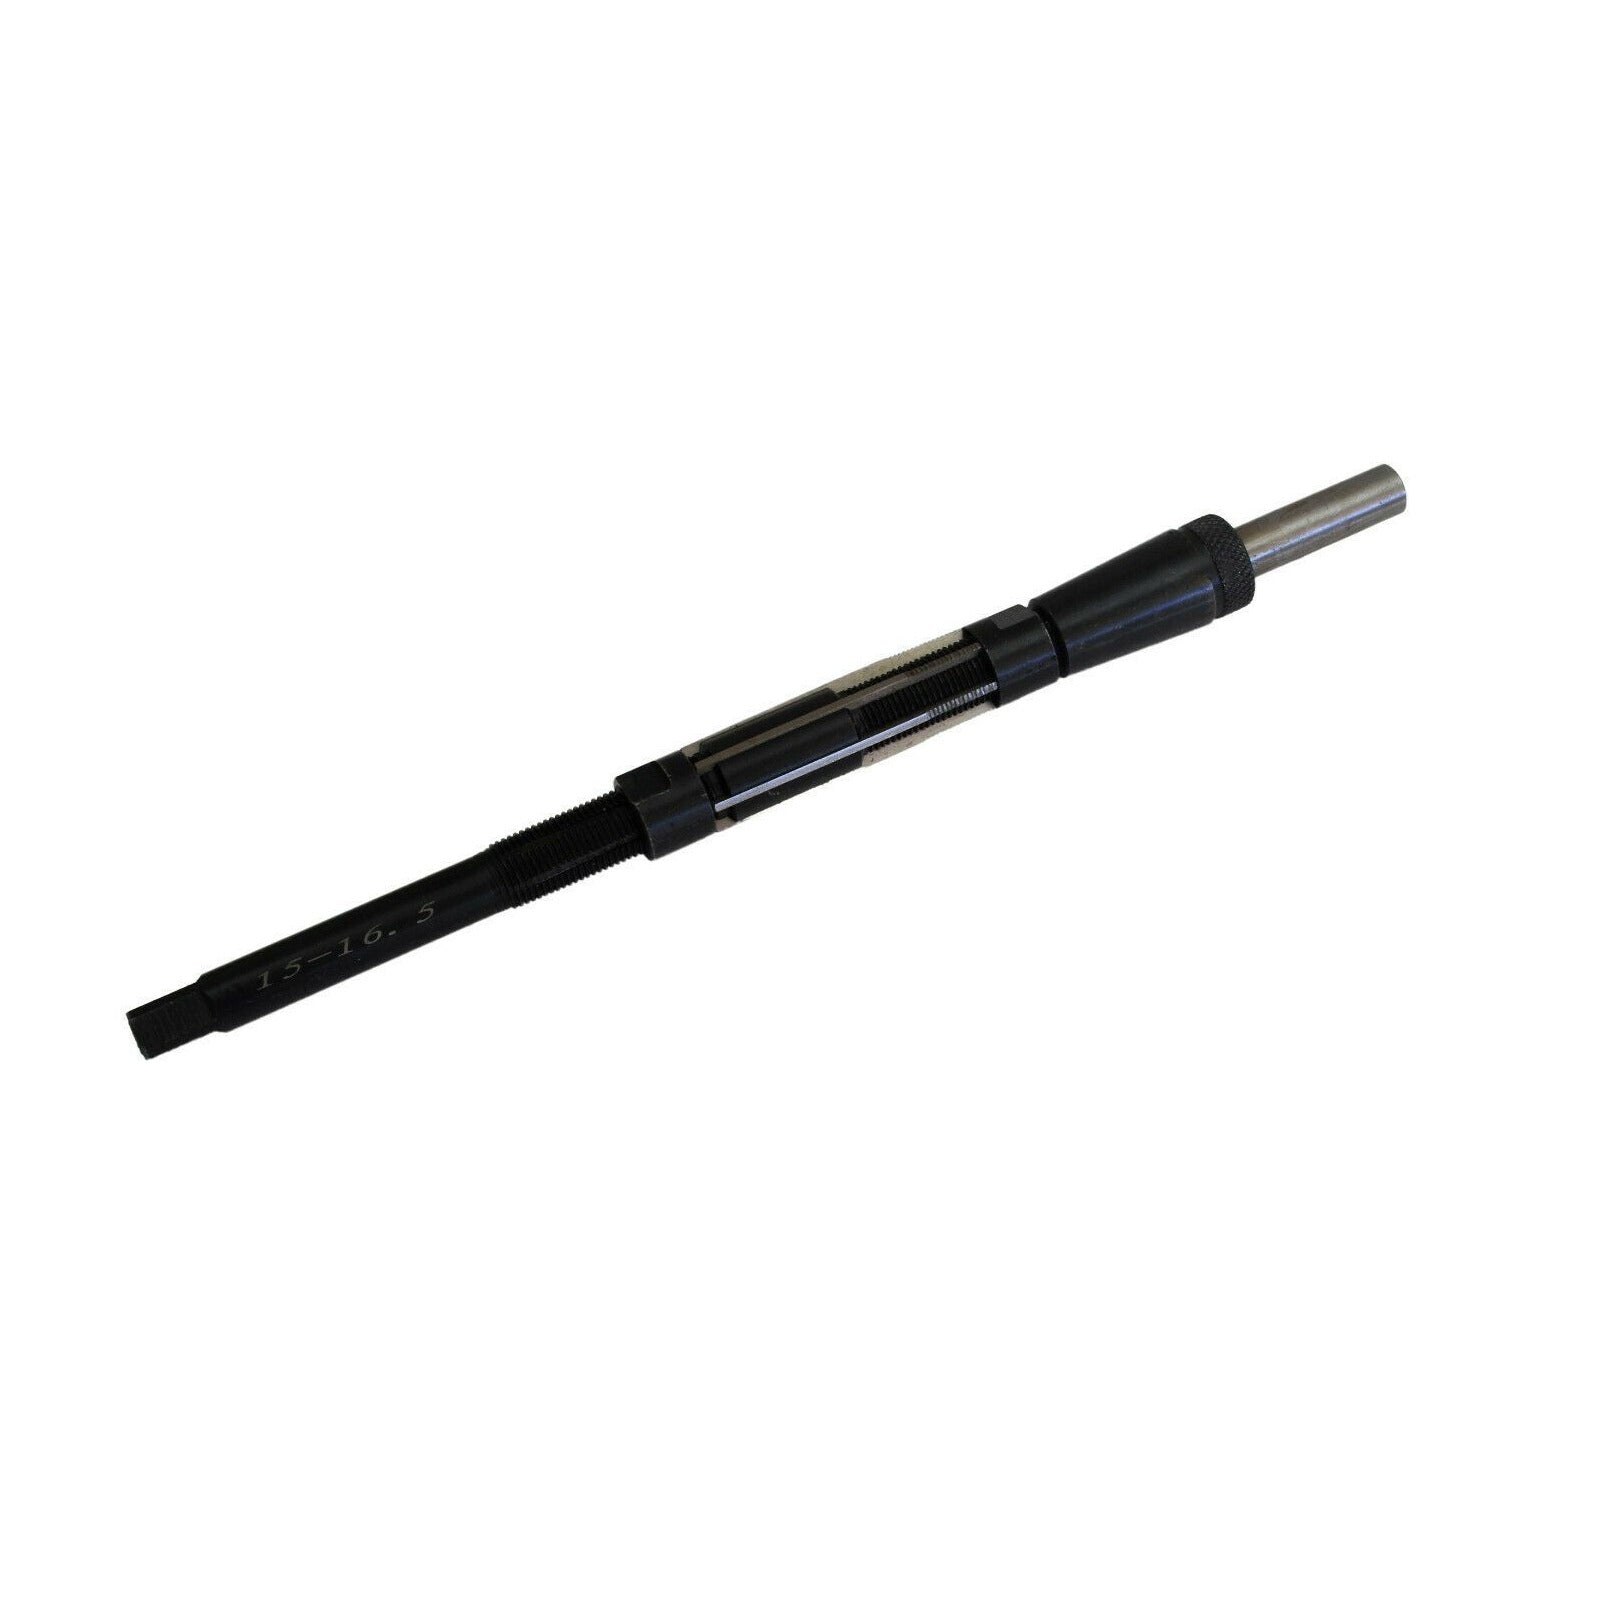 15 - 16.5mm Adjustable Hand Reamer with Guide